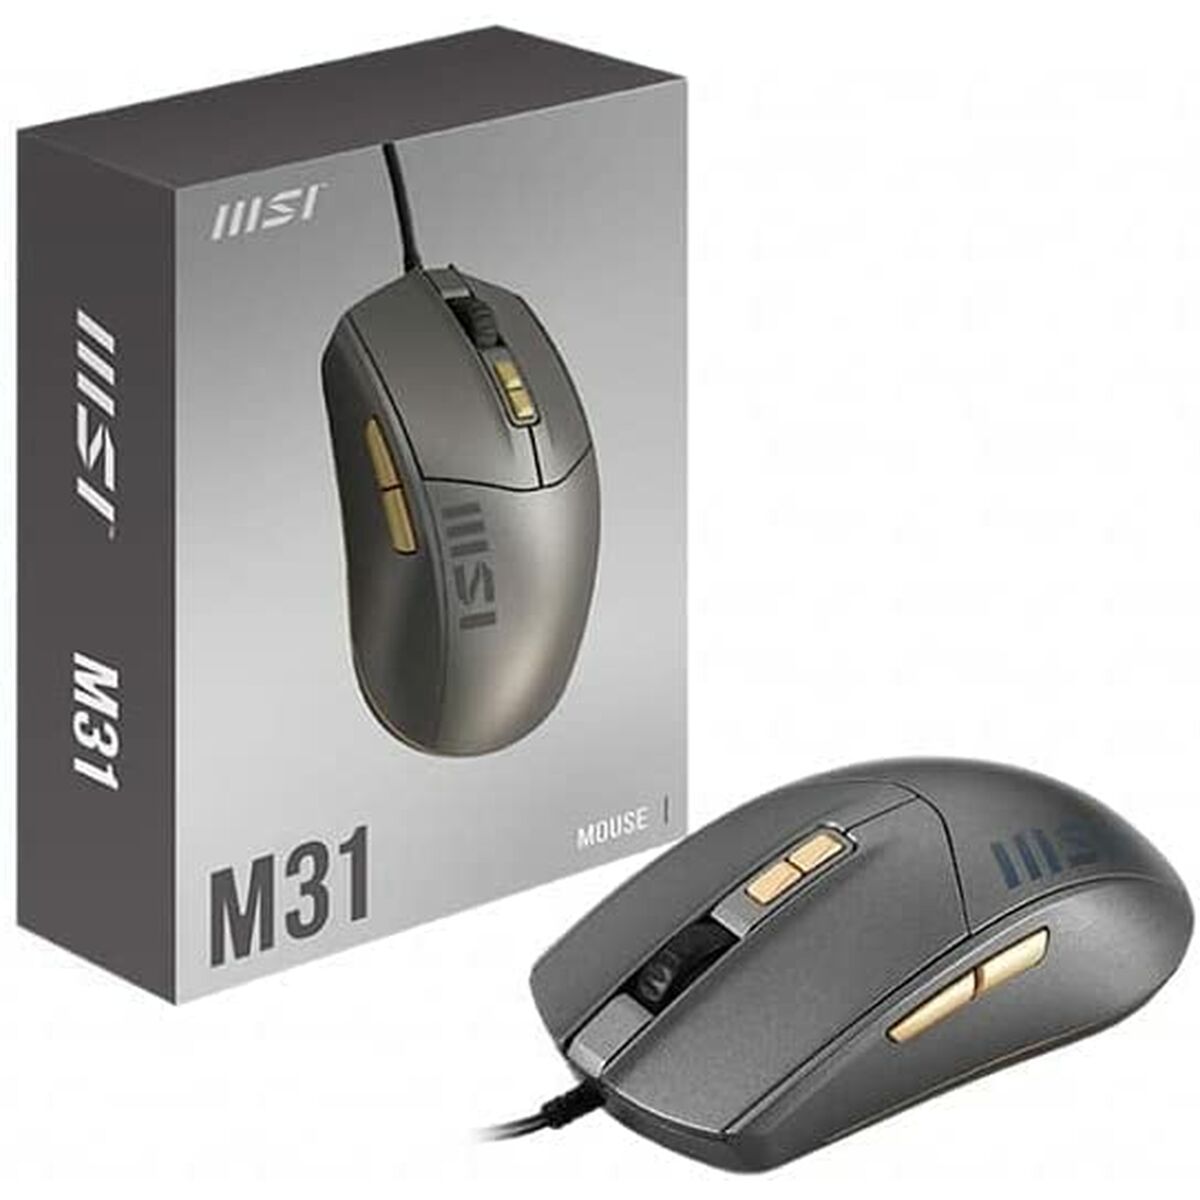 Mouse MSI Grey, MSI, Computing, Accessories, mouse-msi-grey, Brand_MSI, category-reference-2609, category-reference-2642, category-reference-2656, category-reference-t-19685, category-reference-t-19908, category-reference-t-21353, computers / peripherals, Condition_NEW, office, Price_20 - 50, Teleworking, RiotNook